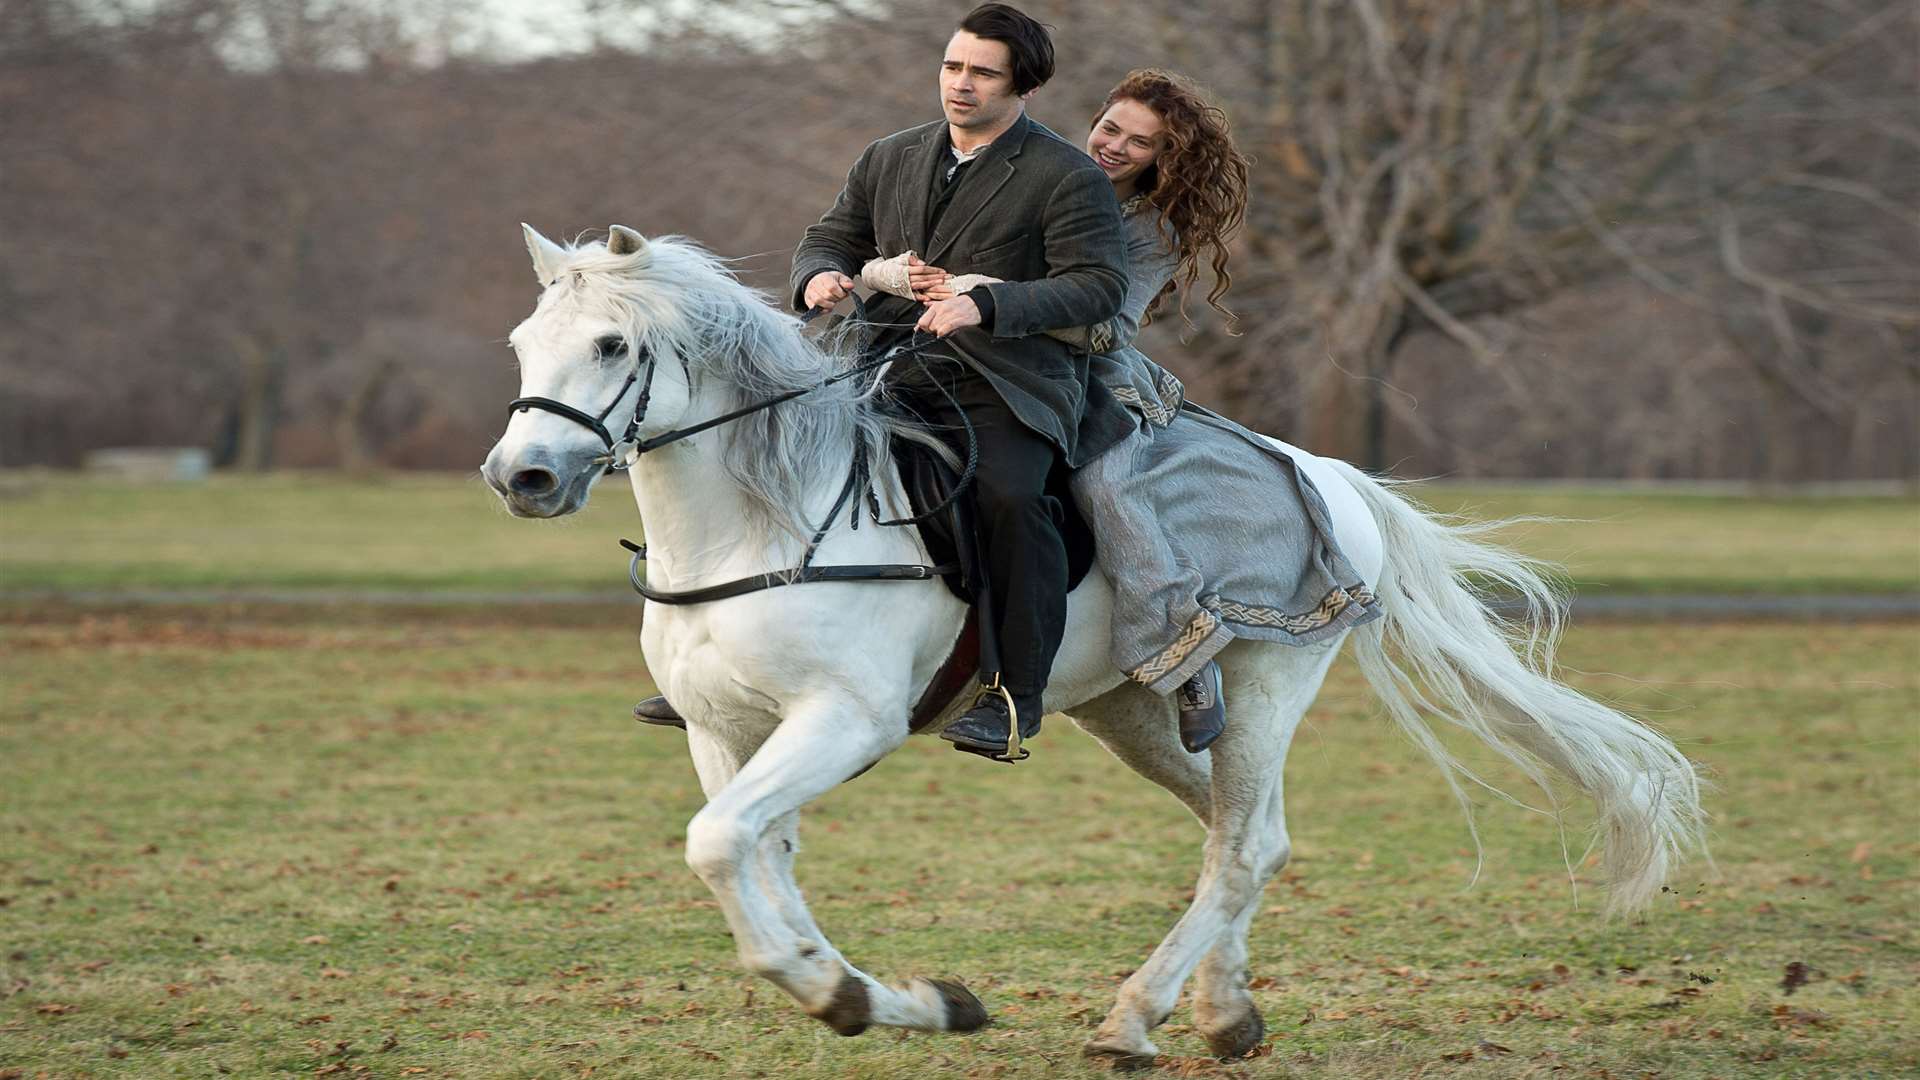 Colin Farrell and Jessica Brown Findlay, in A New York Winter's Tale. Picture: PA Photo/Warner Bros